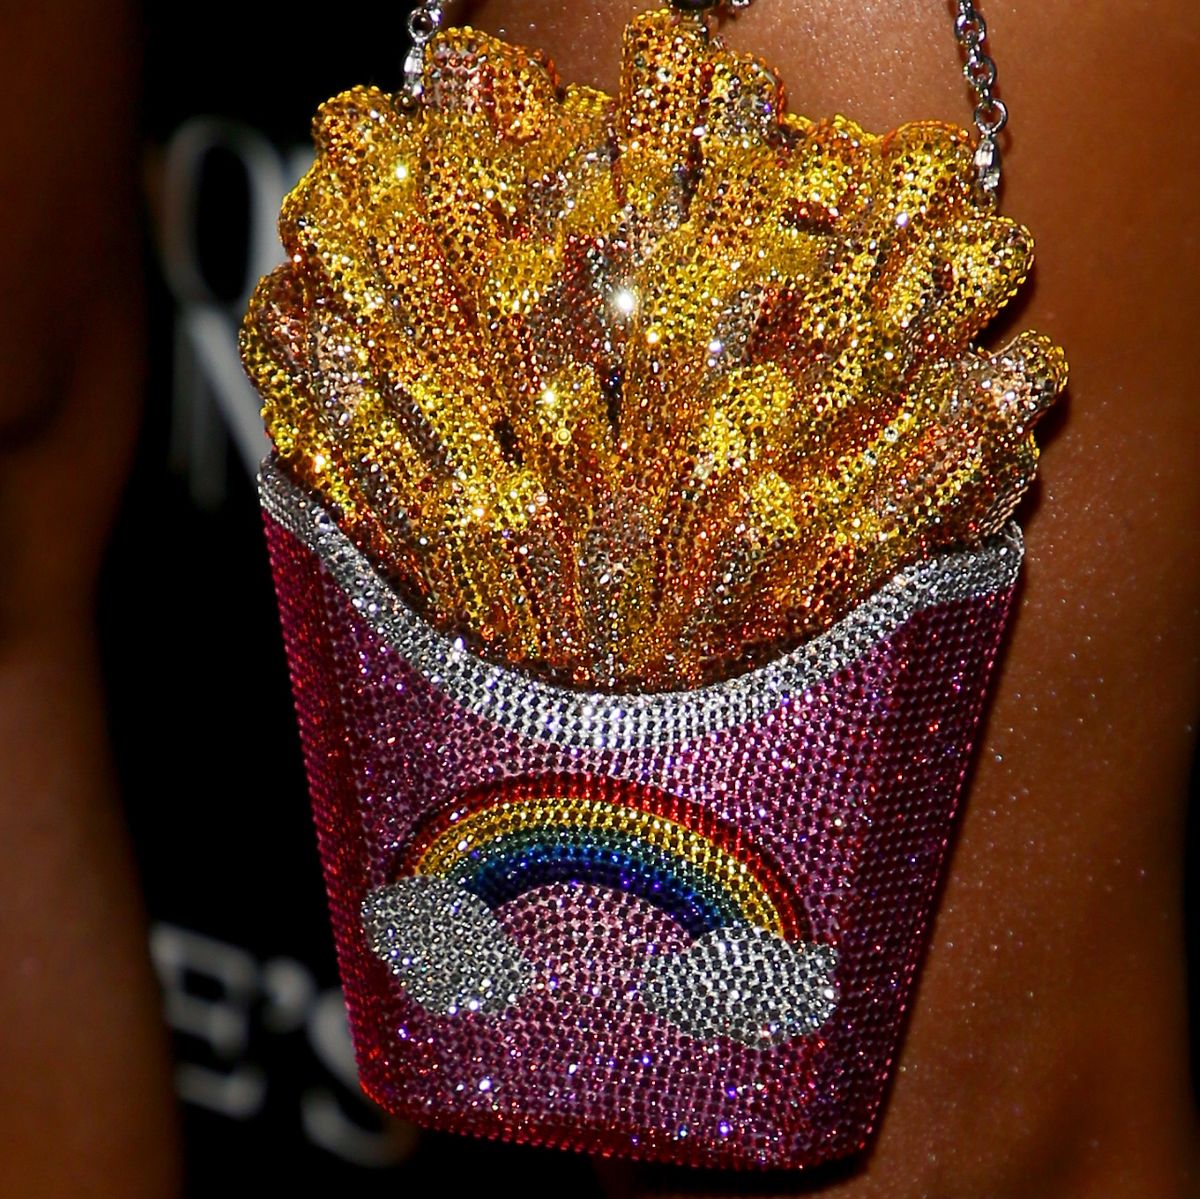 Kim Kardashian's French Fry Purse Is A Sight To Behold